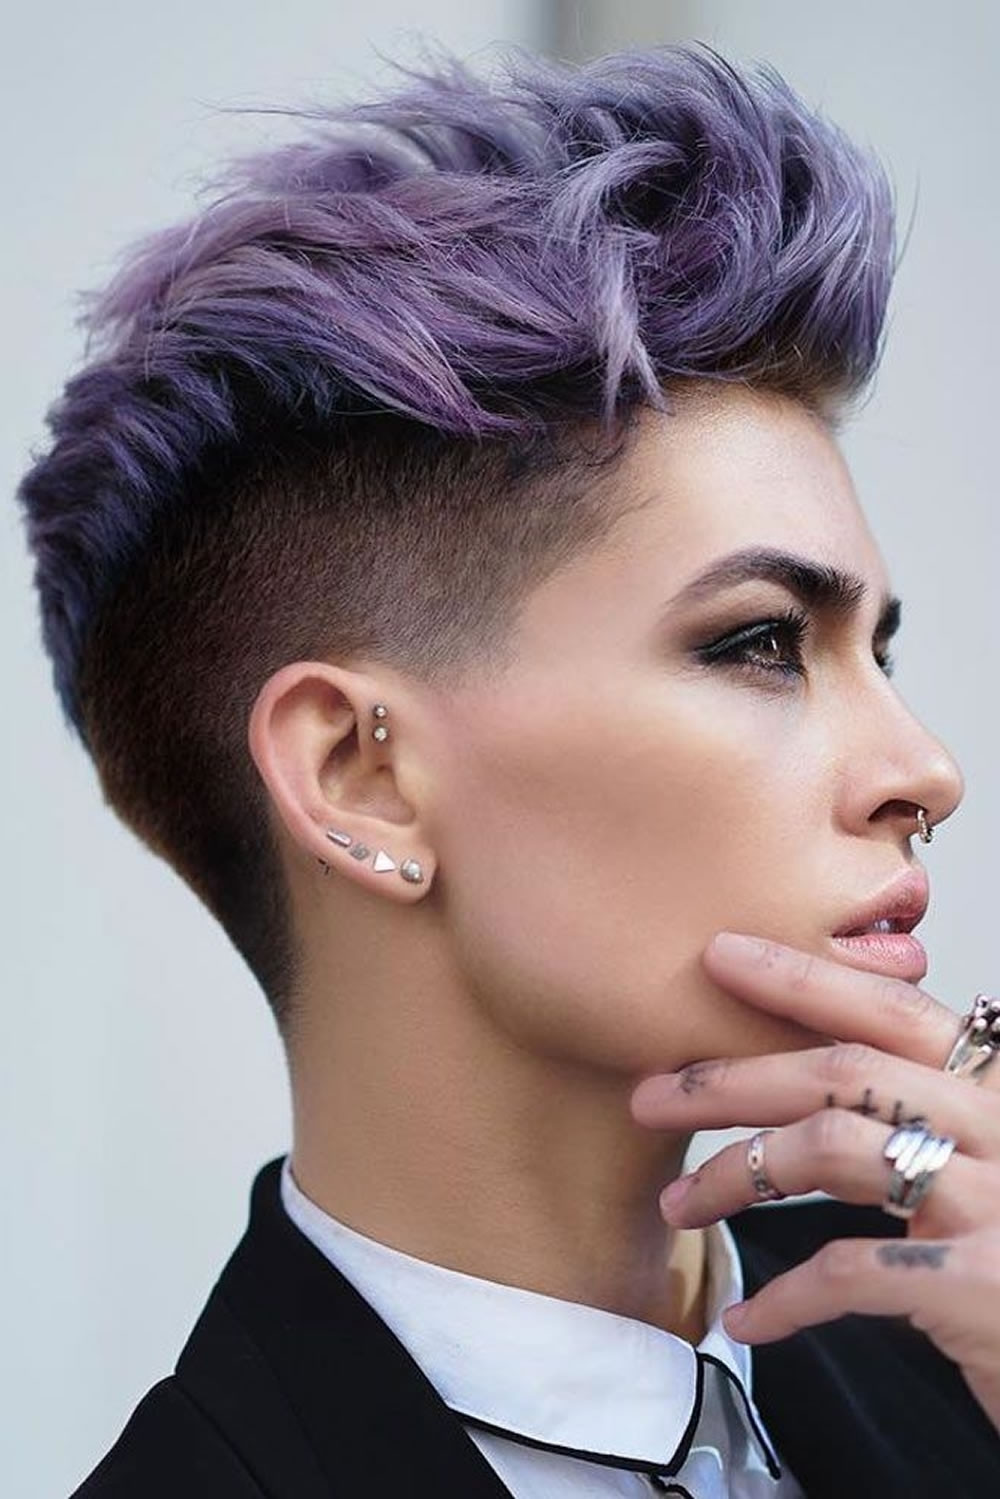 Womens Mohawk Hairstyles 2020
 25 Fade Haircuts for Women Go Glam with Short Trendy